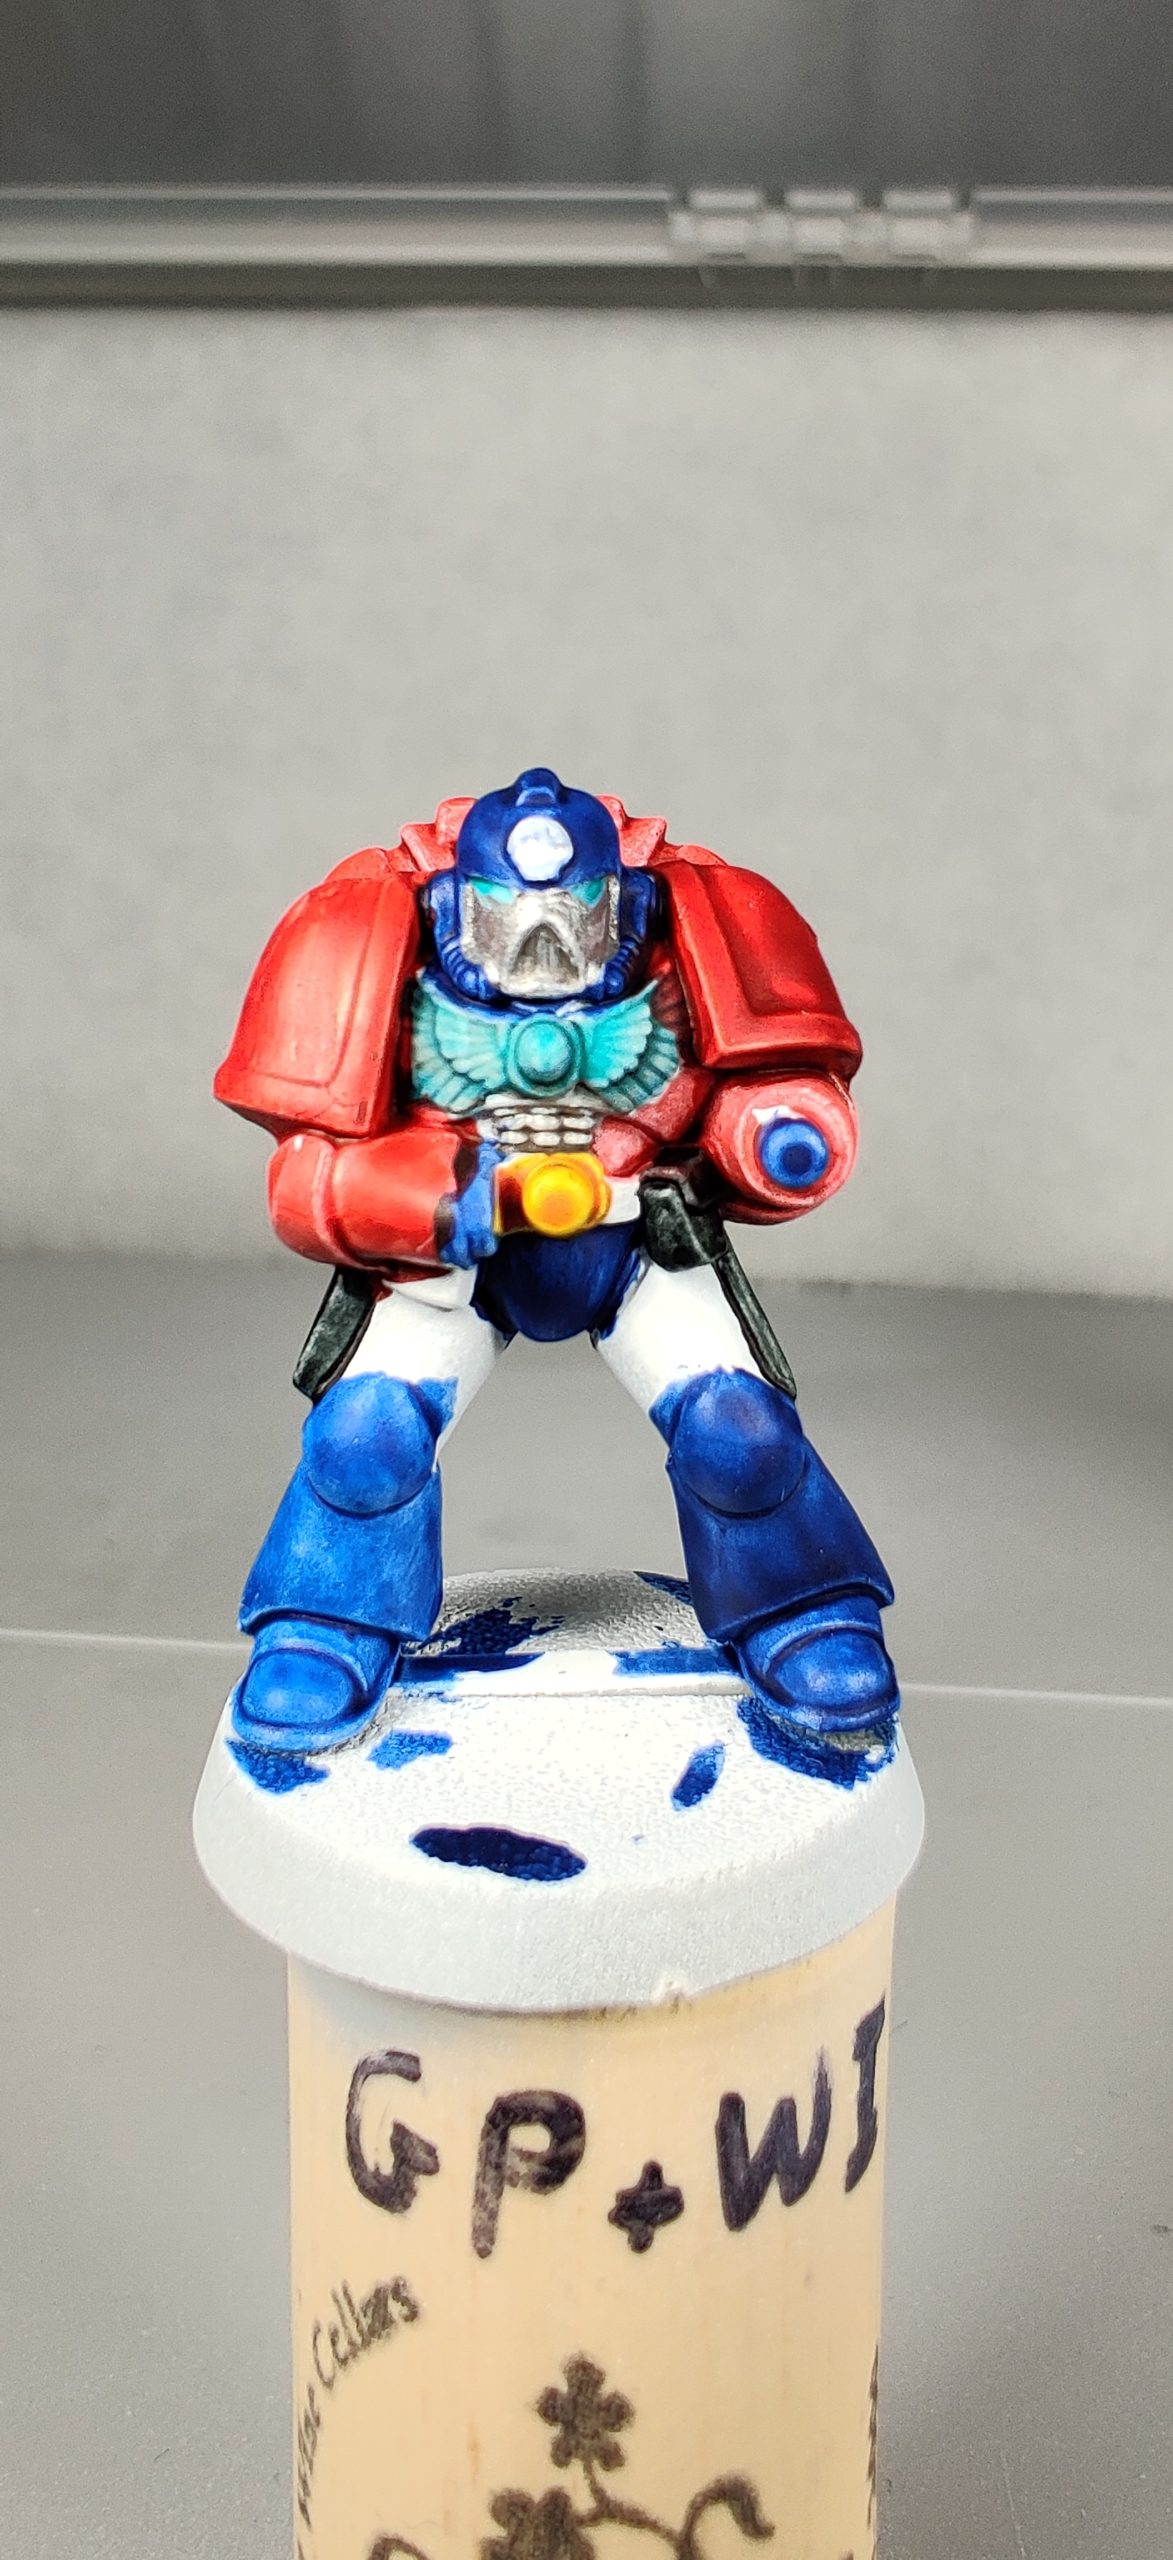 First Fists of the Prime Marine test model.